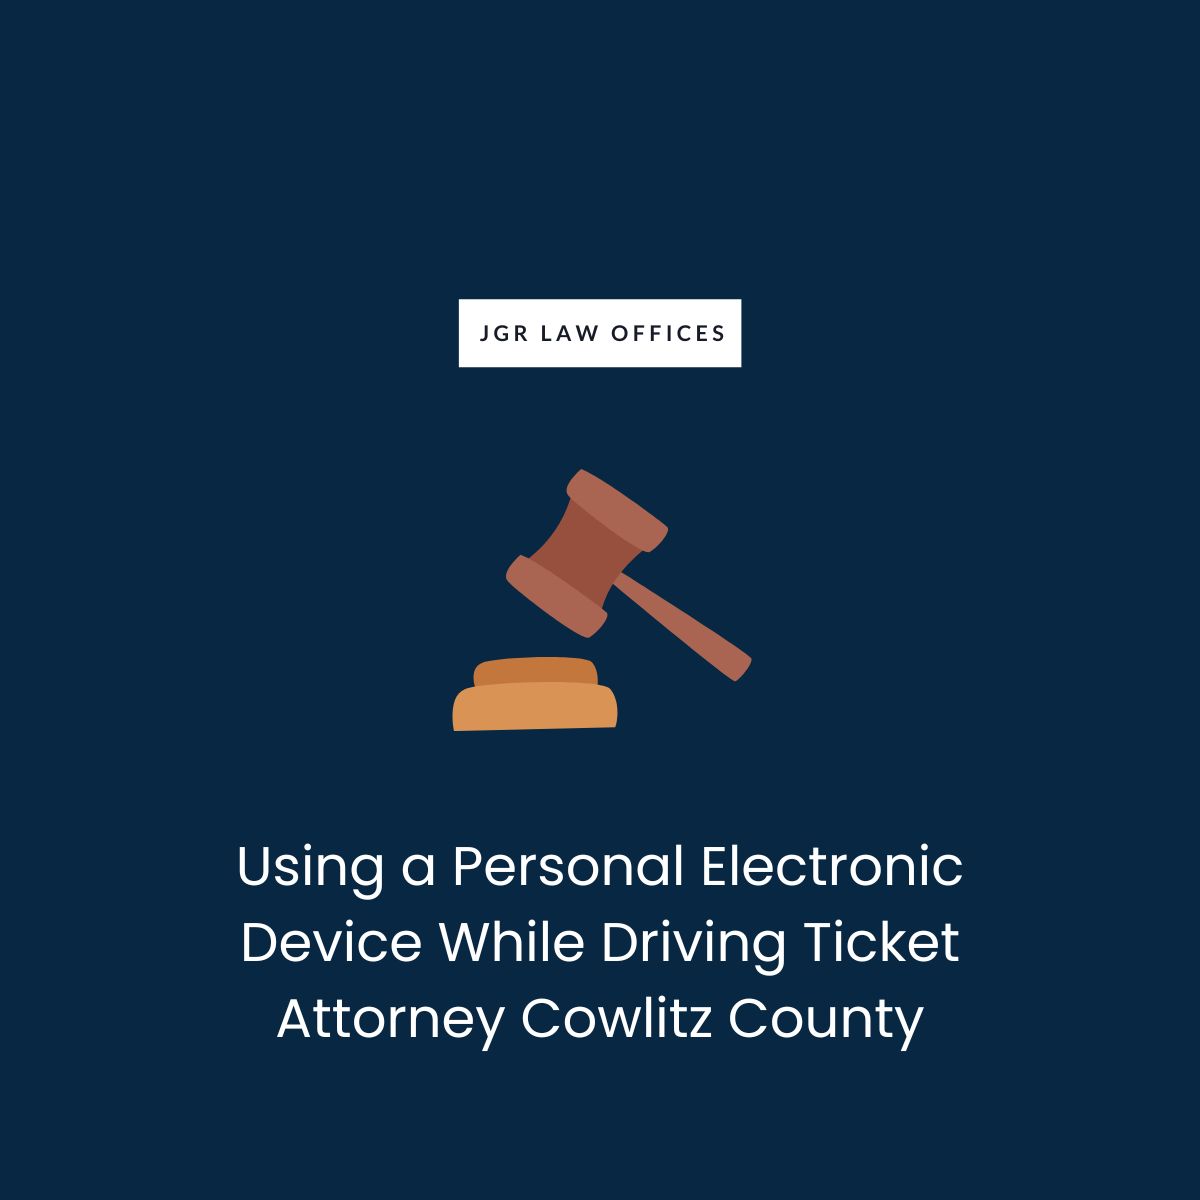 Using a Personal Electronic Device While Driving Ticket Attorney Cowlitz County